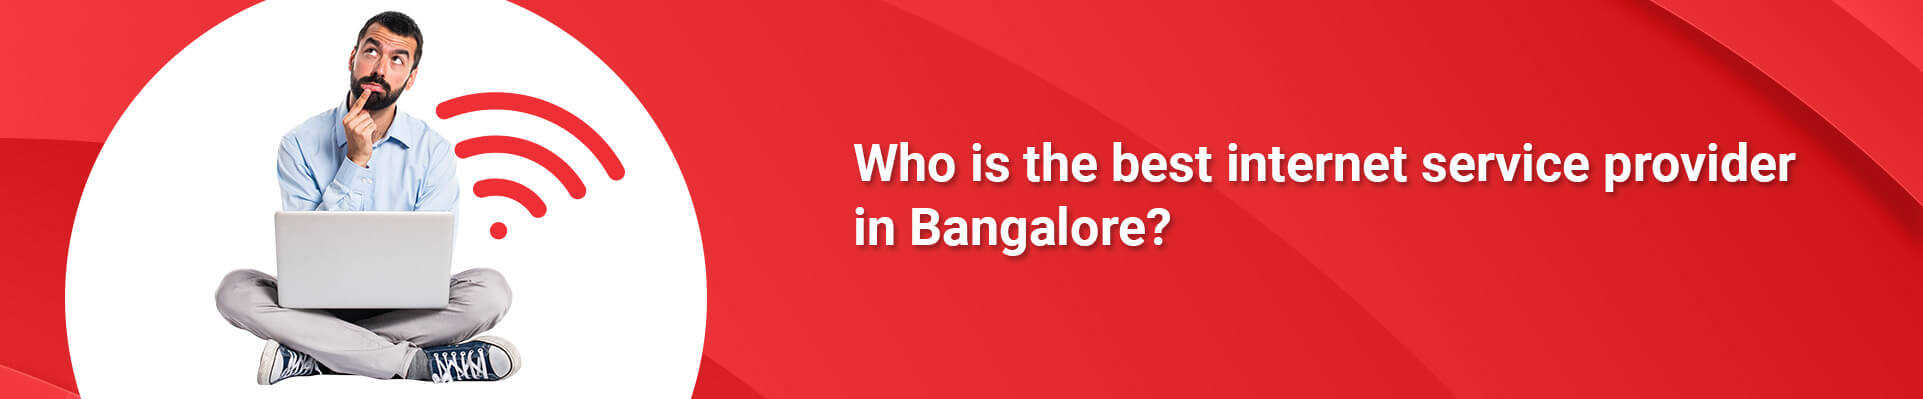 Who is the best internet service provider in Bangalore?